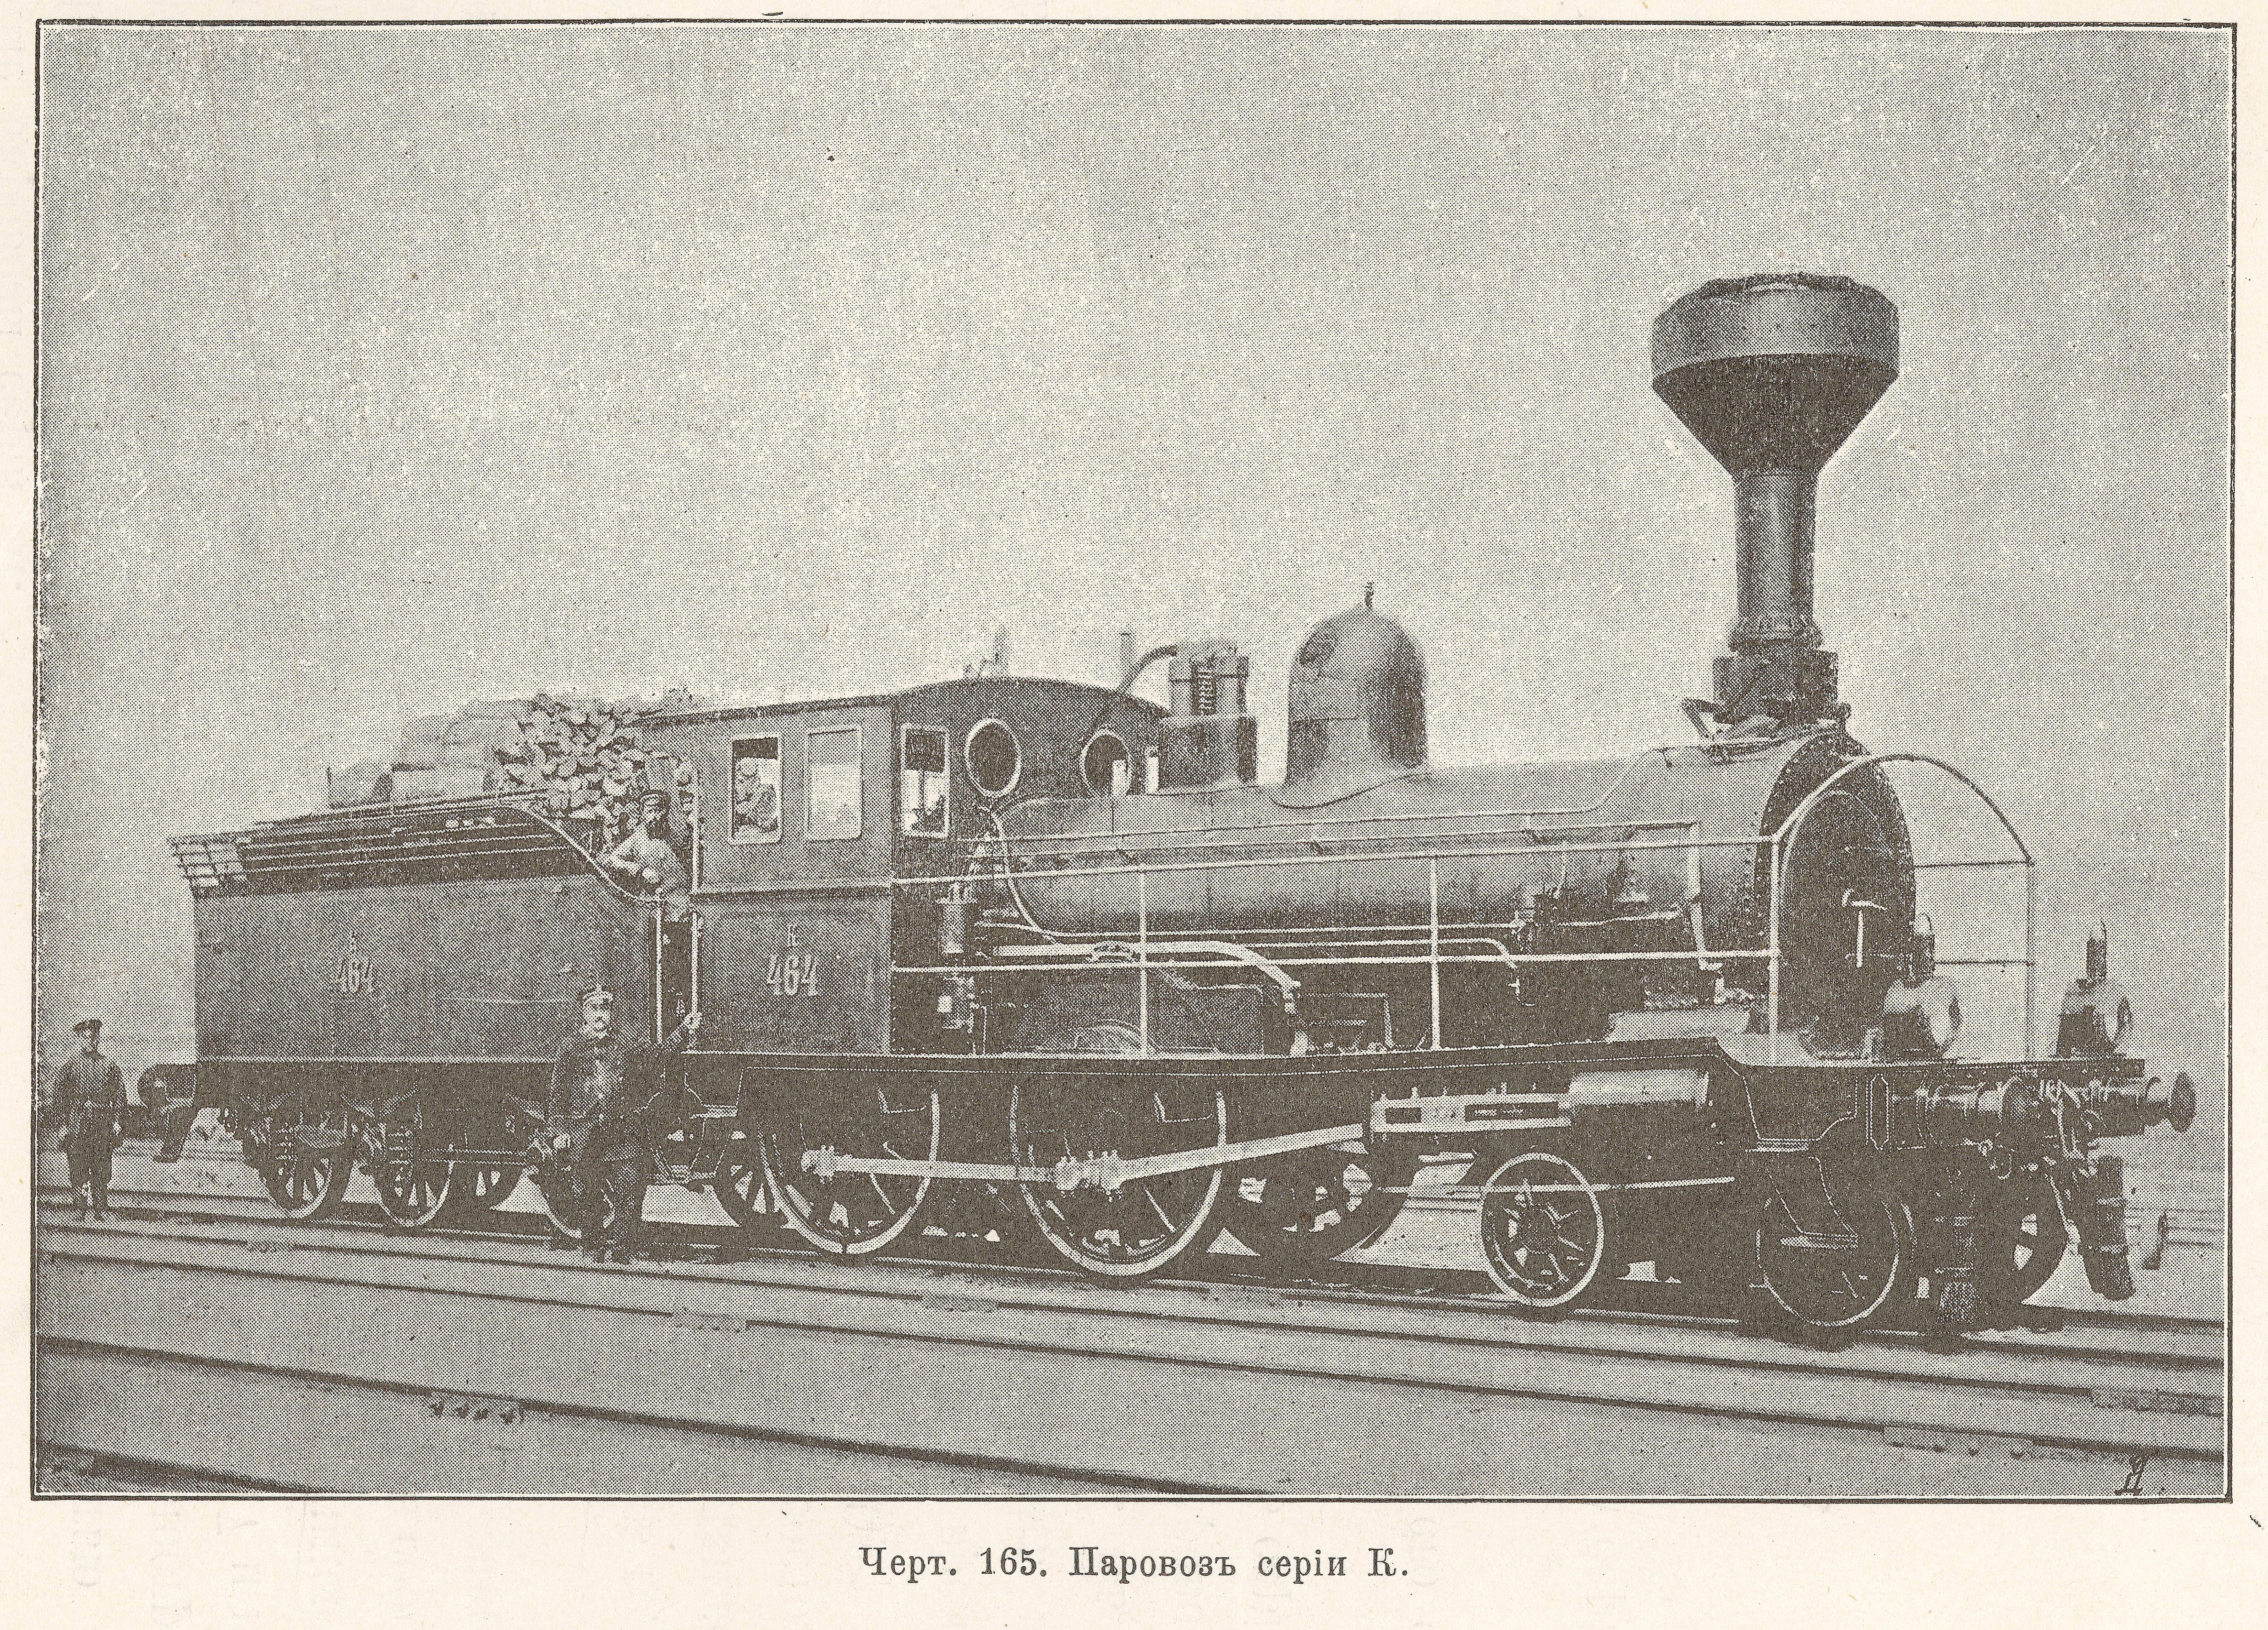 Series K Engine (photo), which could have plausibly been the locomotive that pulled Anna's train (JPG), courtesy Sergei Kiselev